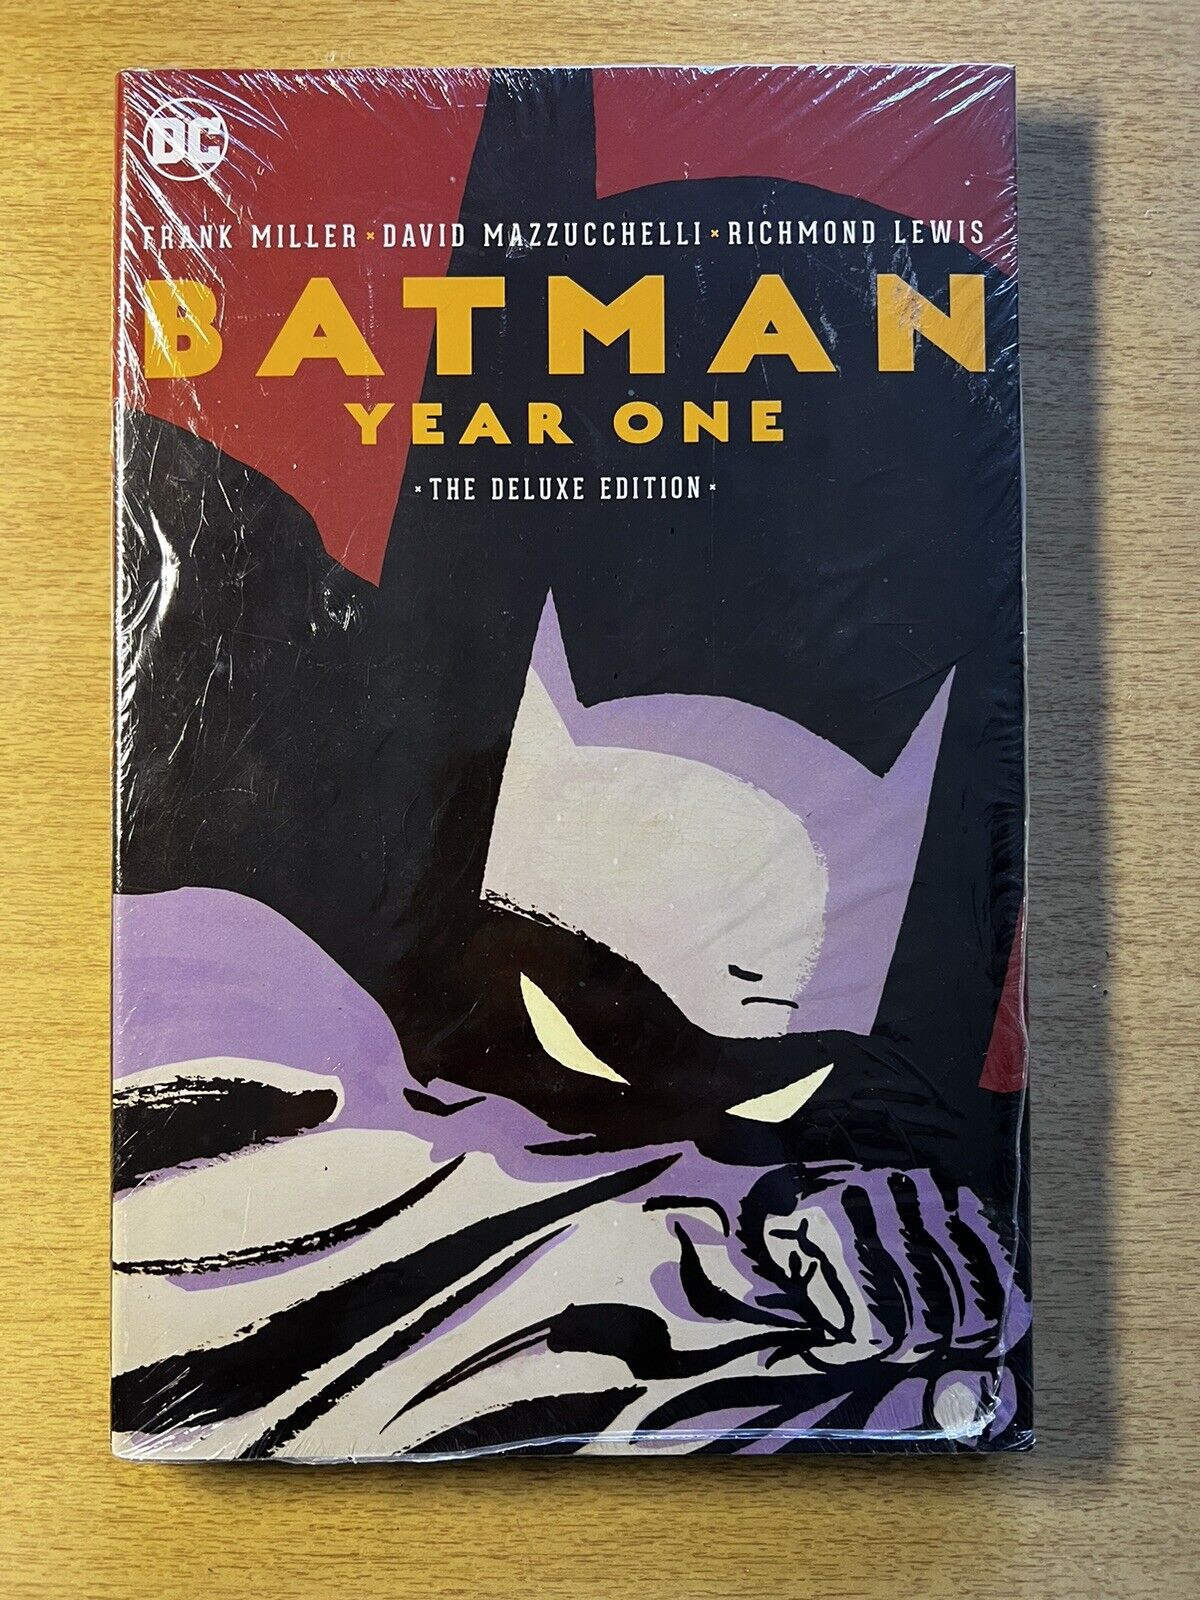 BATMAN: Year One &Two - 30th Anniv. Deluxe Edition - Brand New - SEALED